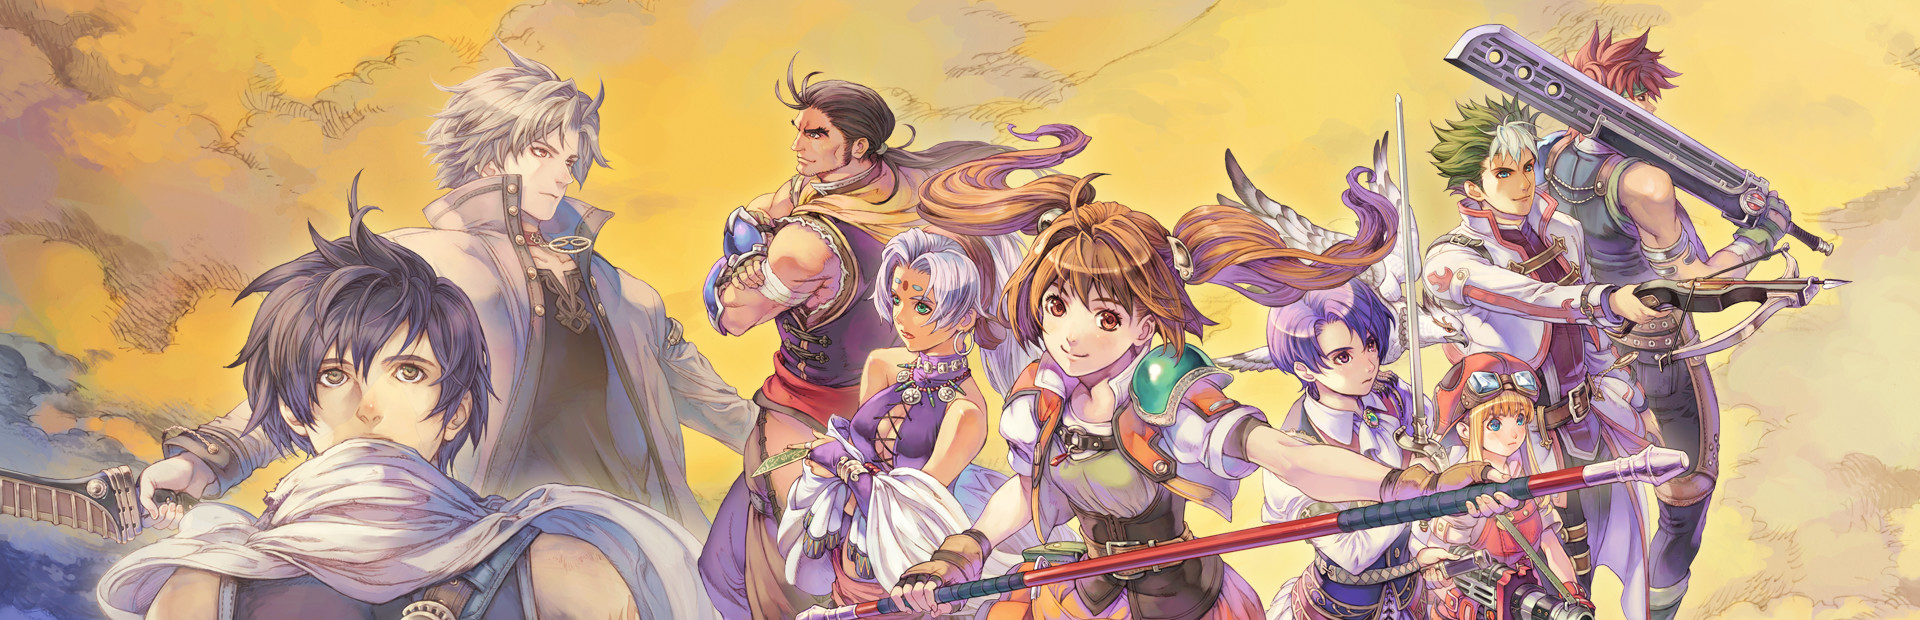 The Legend of Heroes: Trails in the Sky SC cover image